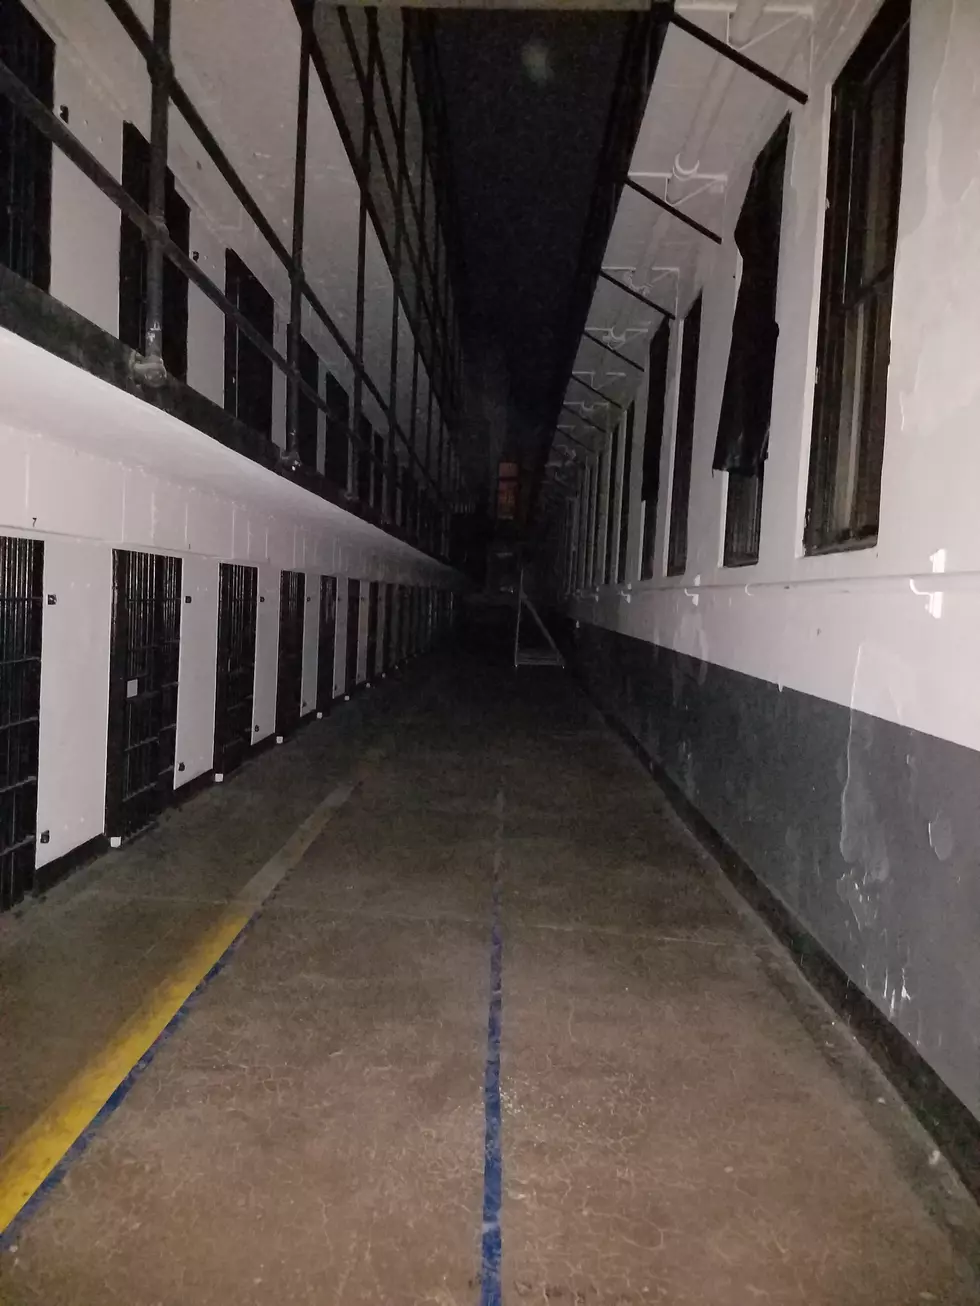 Old Montana Prison Featured on ‘Destination FEAR’ [WATCH]